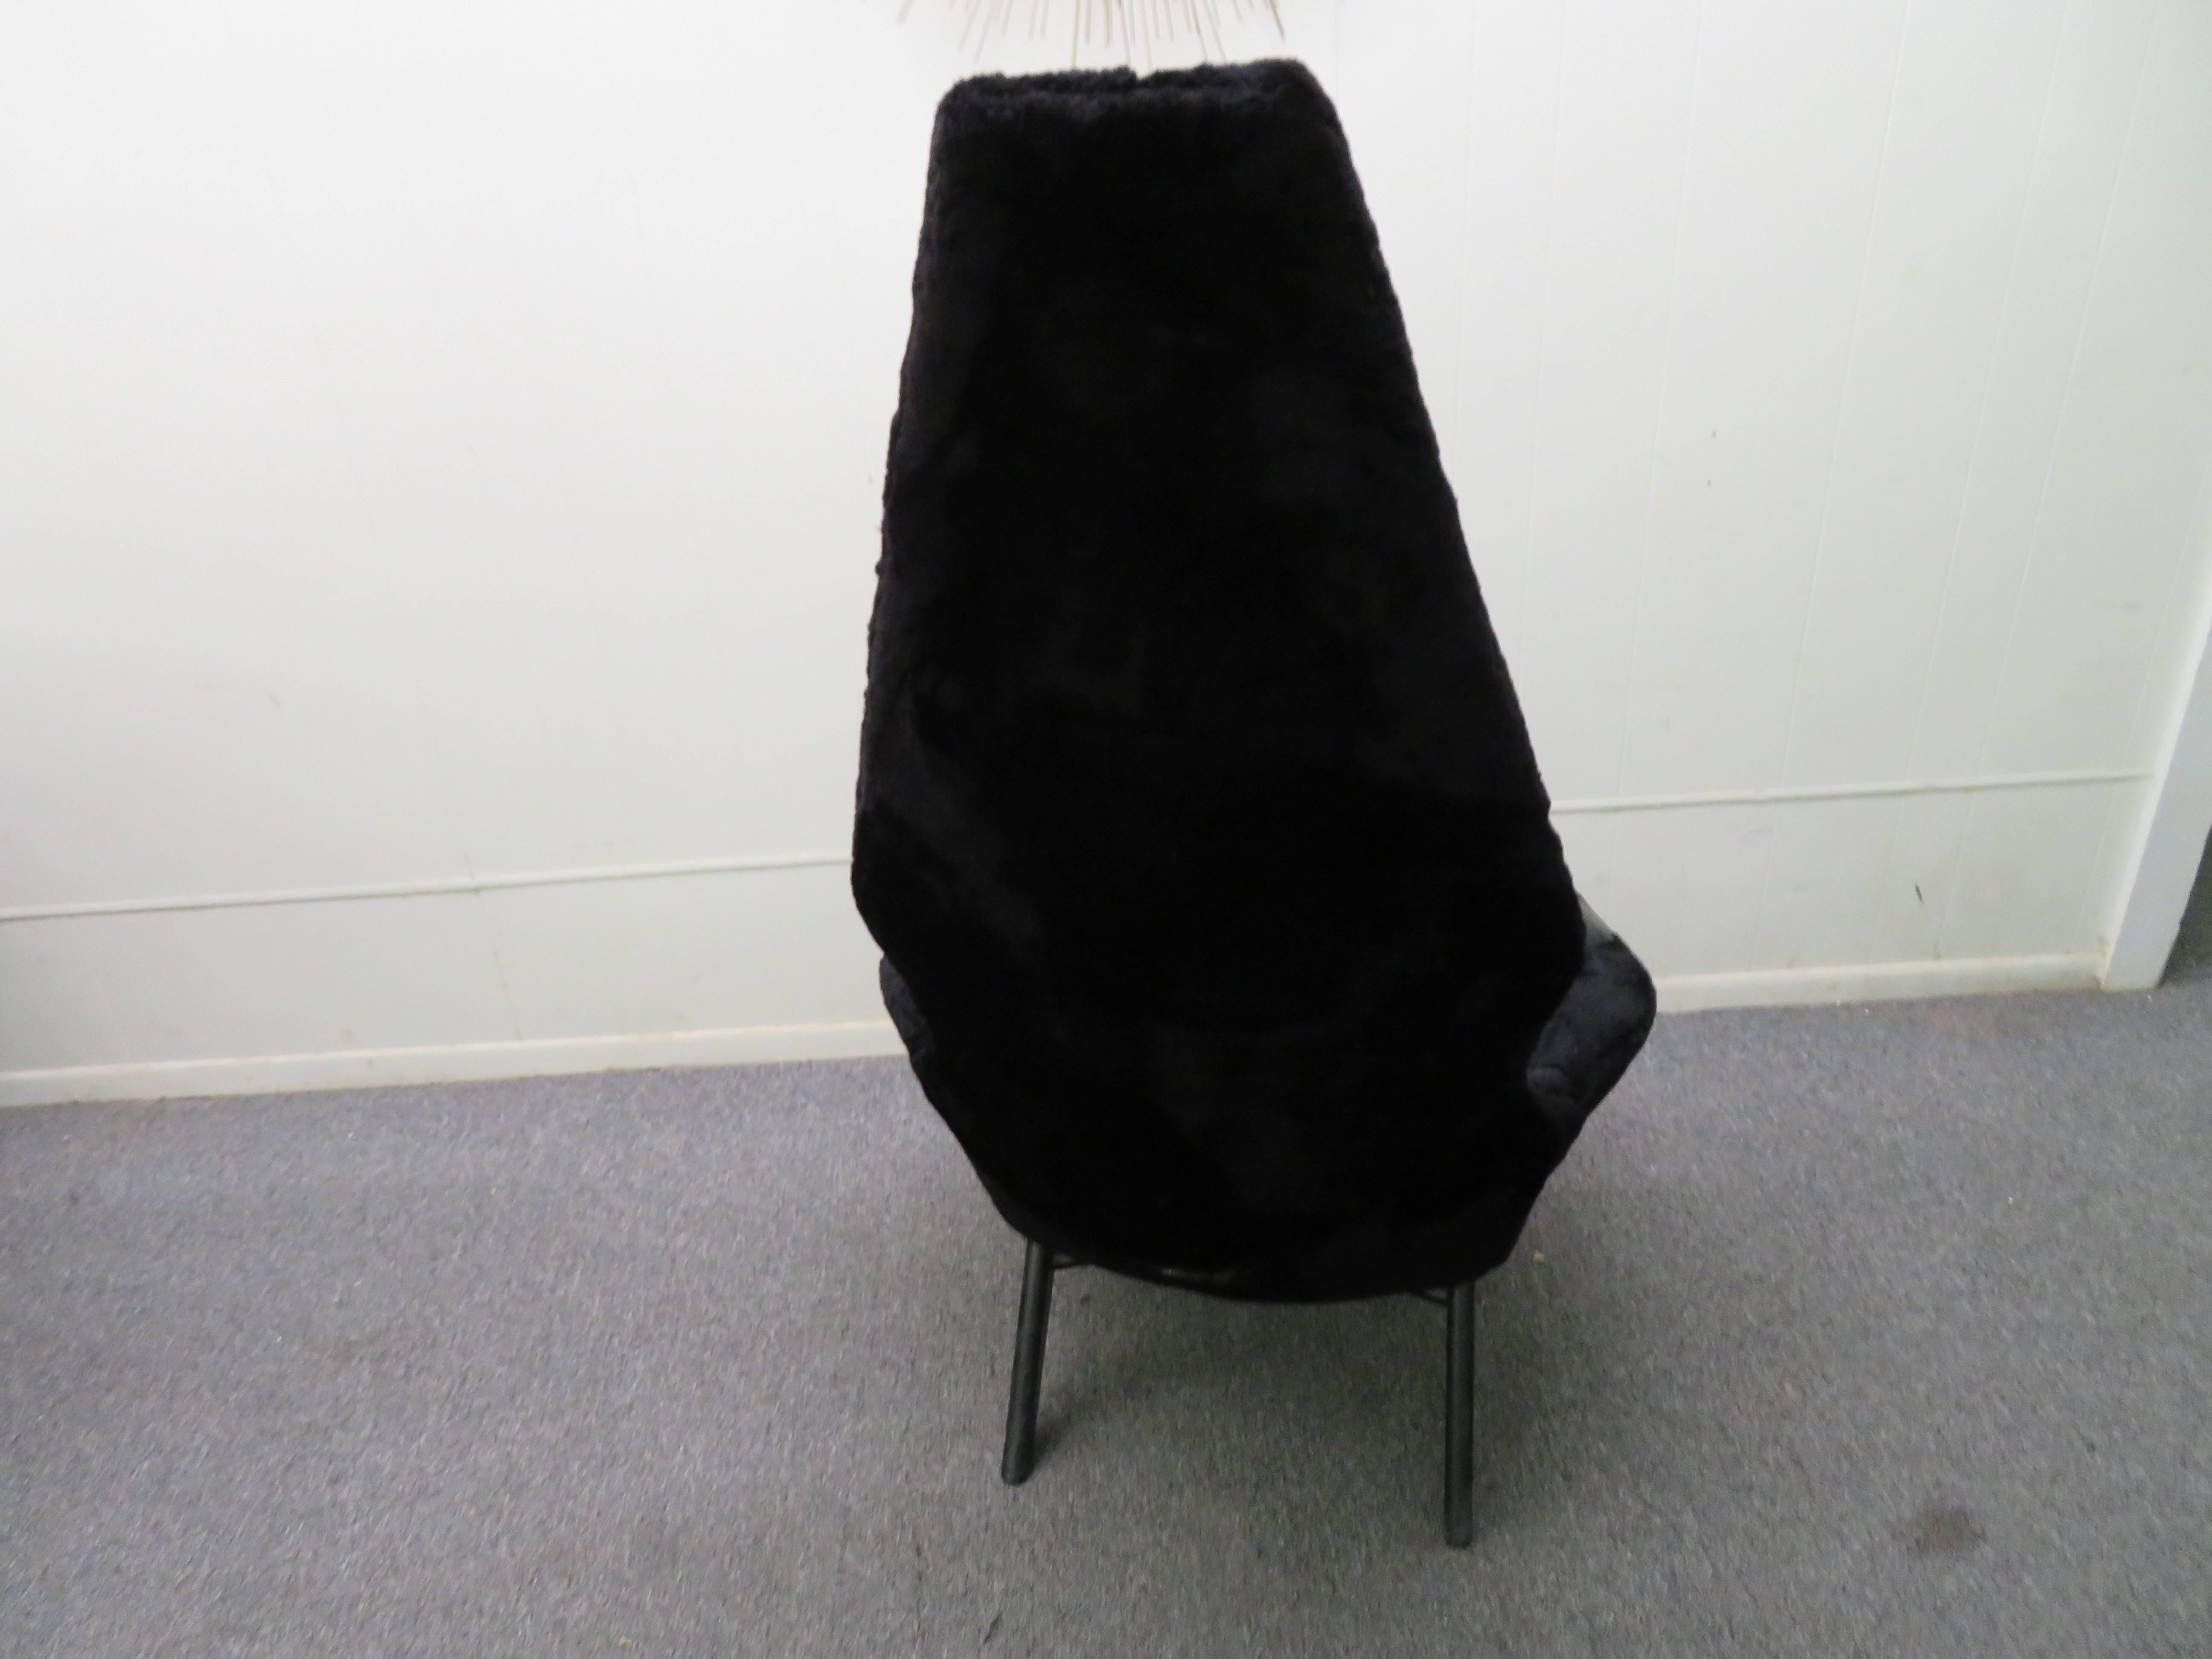 Lovely labeled Adrian Pearsall tall back lounge chair. This chair will need to be re-upholstered, the fabric is worn and foam in seat is hard but the original black lacquered finish is in fine shape. Please check out the huge selection of other